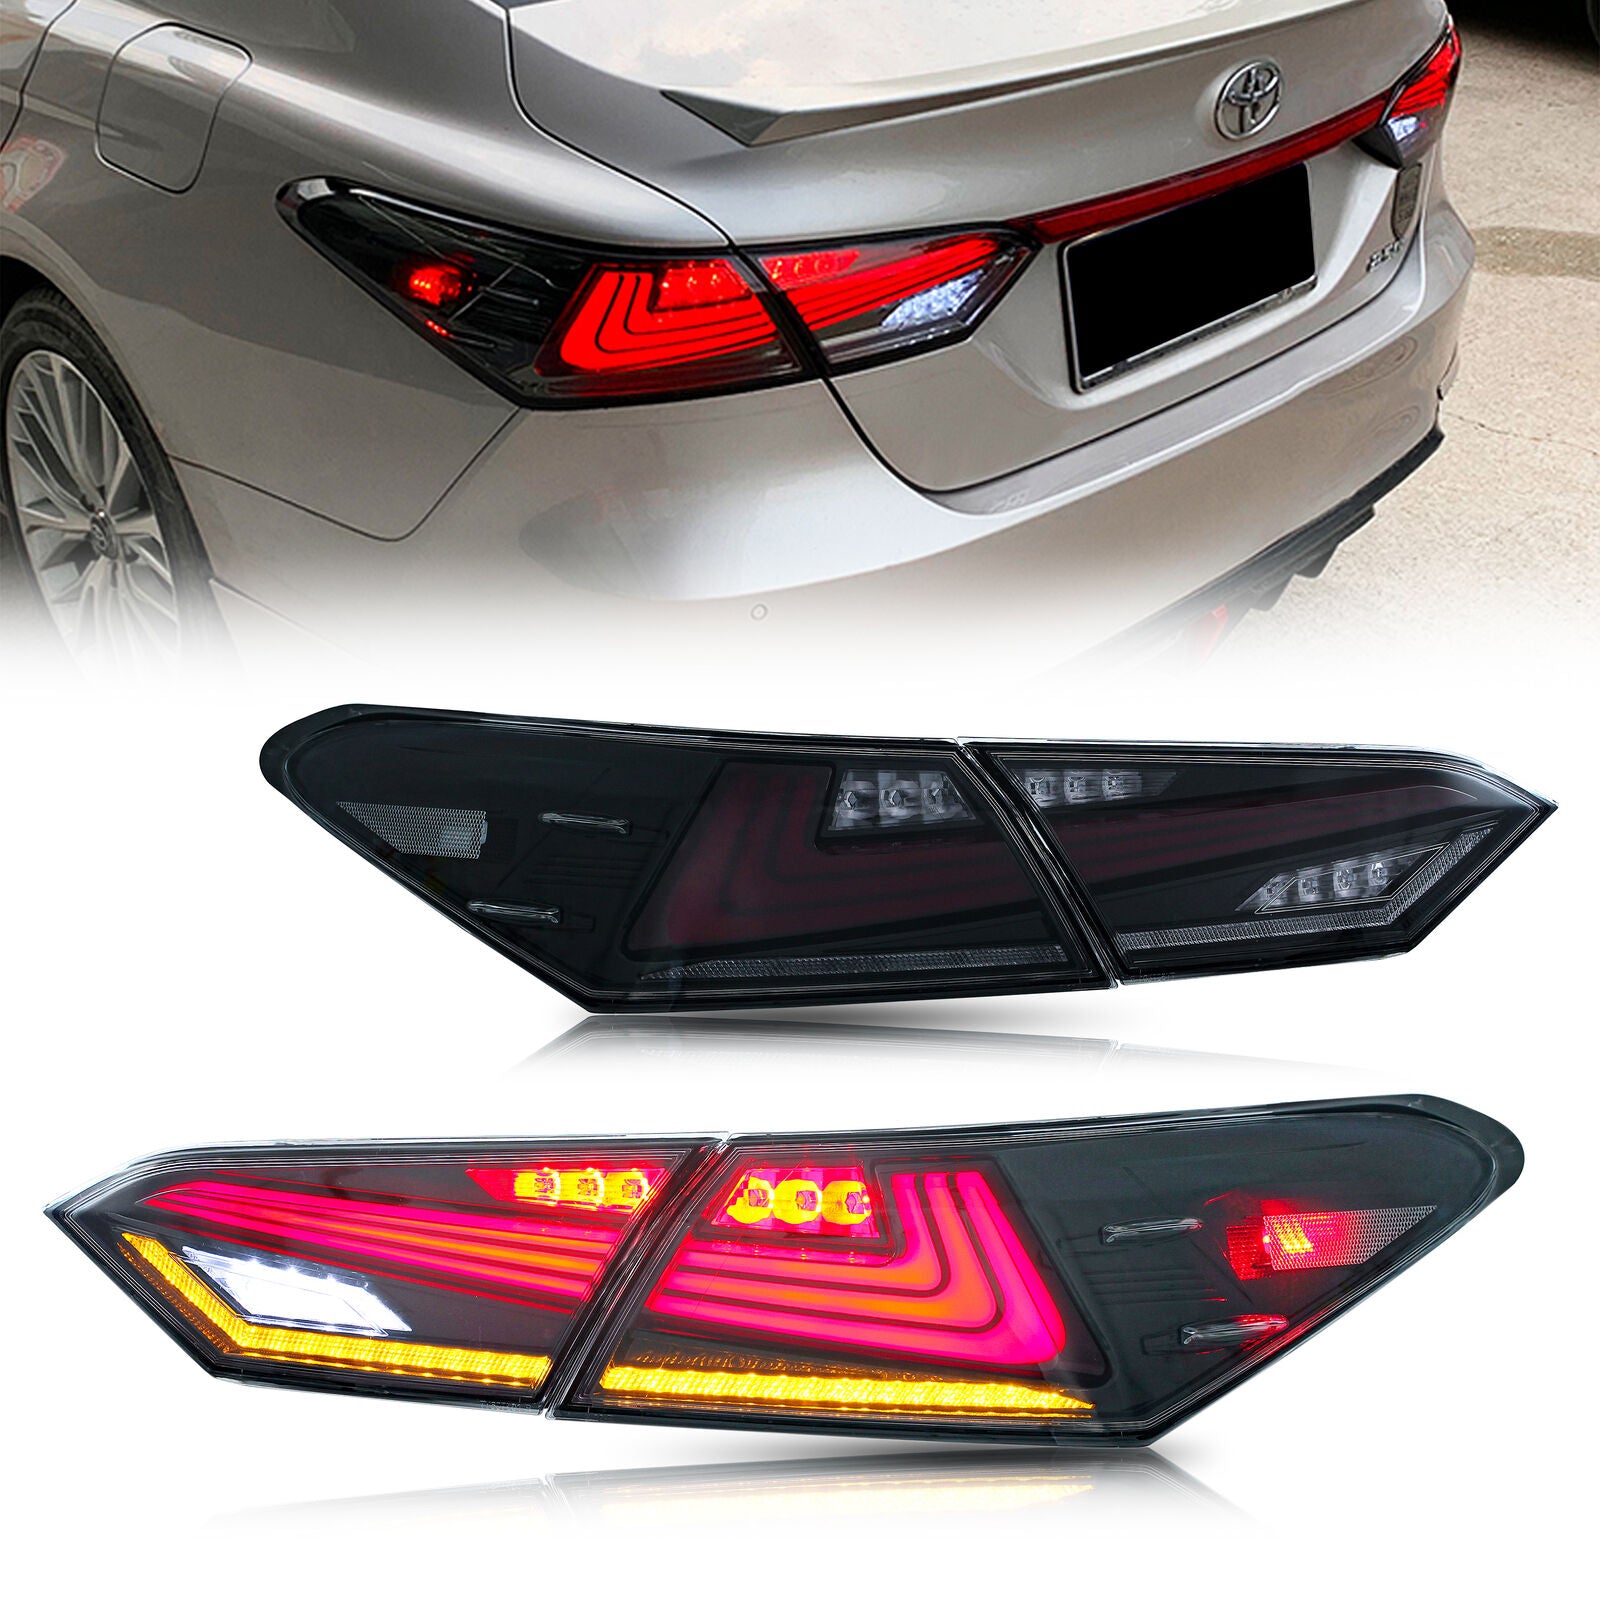 inginuity time Nike LED Tail Lights for Toyota Camry 2018 2019